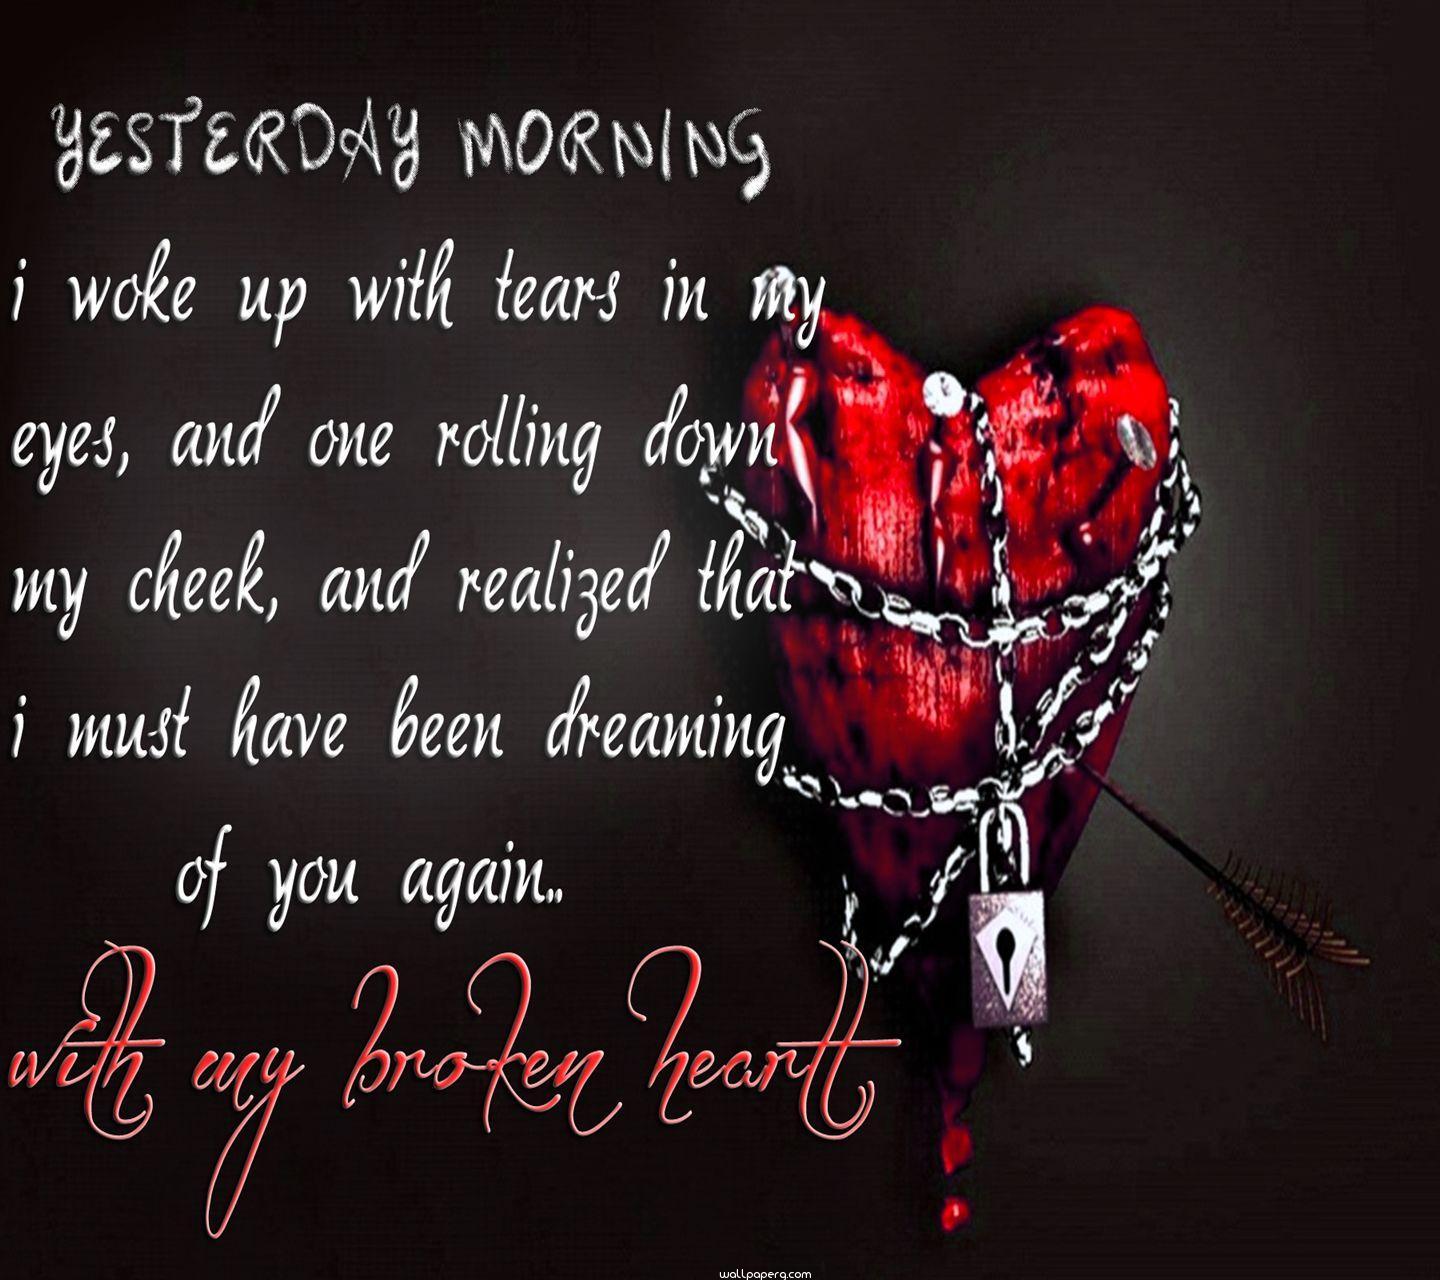 Download Painful heart hd wallpaper for mobile - Heart touching love quote  for your mobile cell phone